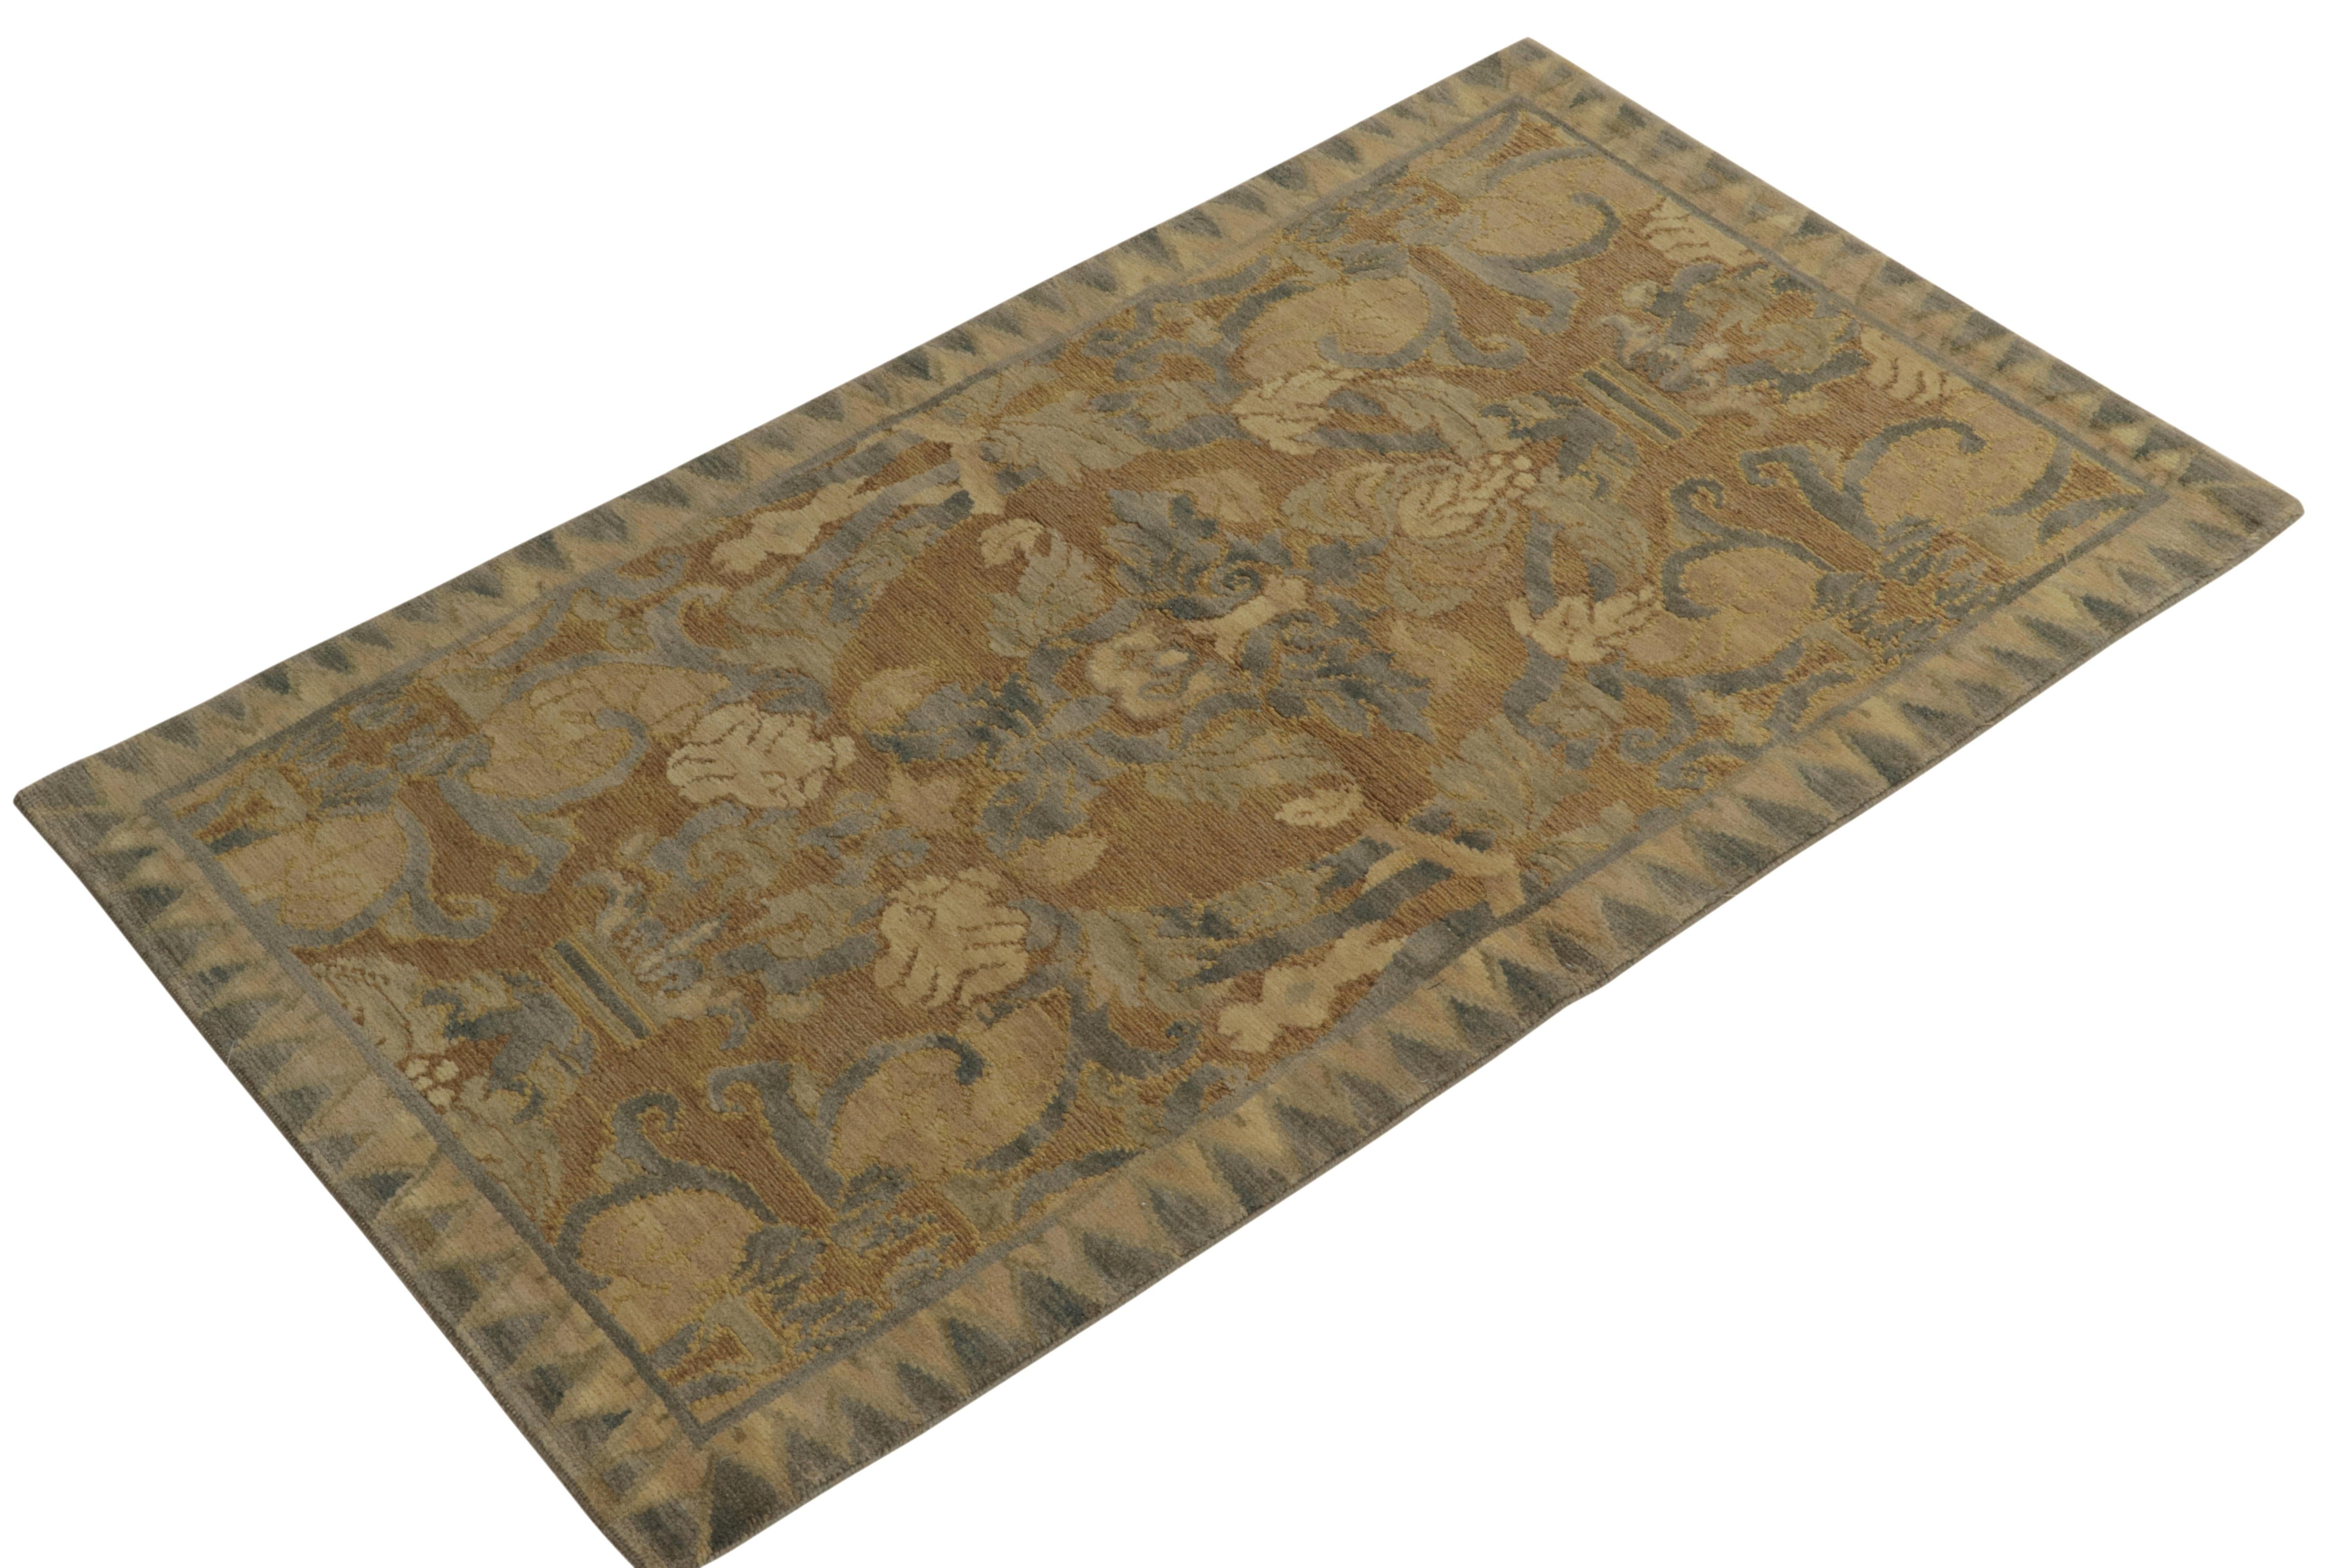 Newly added to Rug & Kilim’s European Collection, a 3x5 inspired by classic Arts & Crafts rugs of the early 20th century. The beige-brown colorway enjoys a fabulous play with the blue-gray floral patterns, depicting grand Voysey-esque allusions of